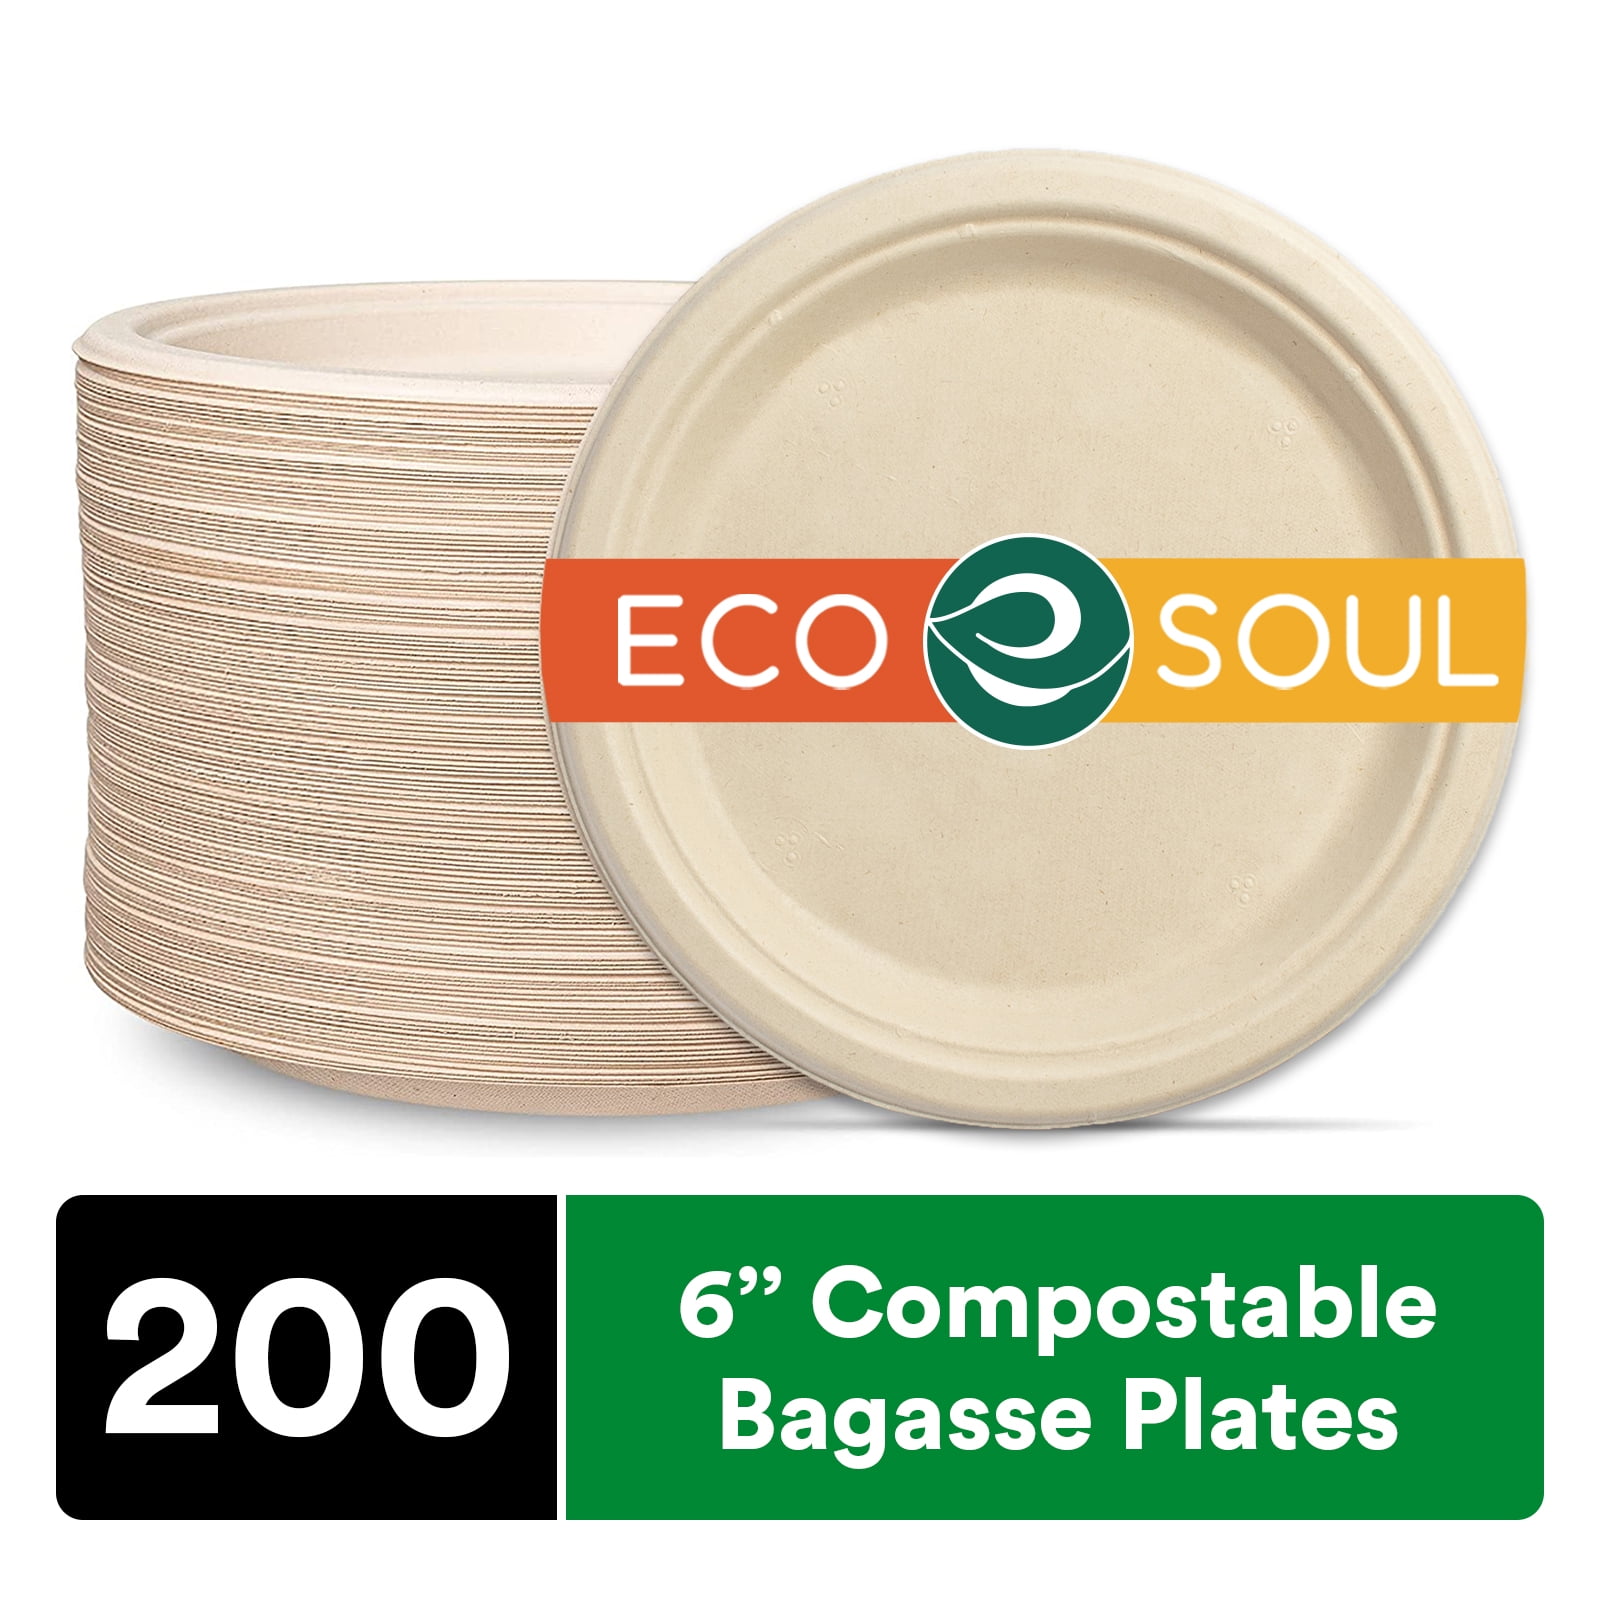 100% Compostable Paper Plates Round Natural Disposable Sugar Cane Bagasse Plate, Eco-Friendly - Green Leaf 7.5 inch Appetizer Plate - Posh Setting